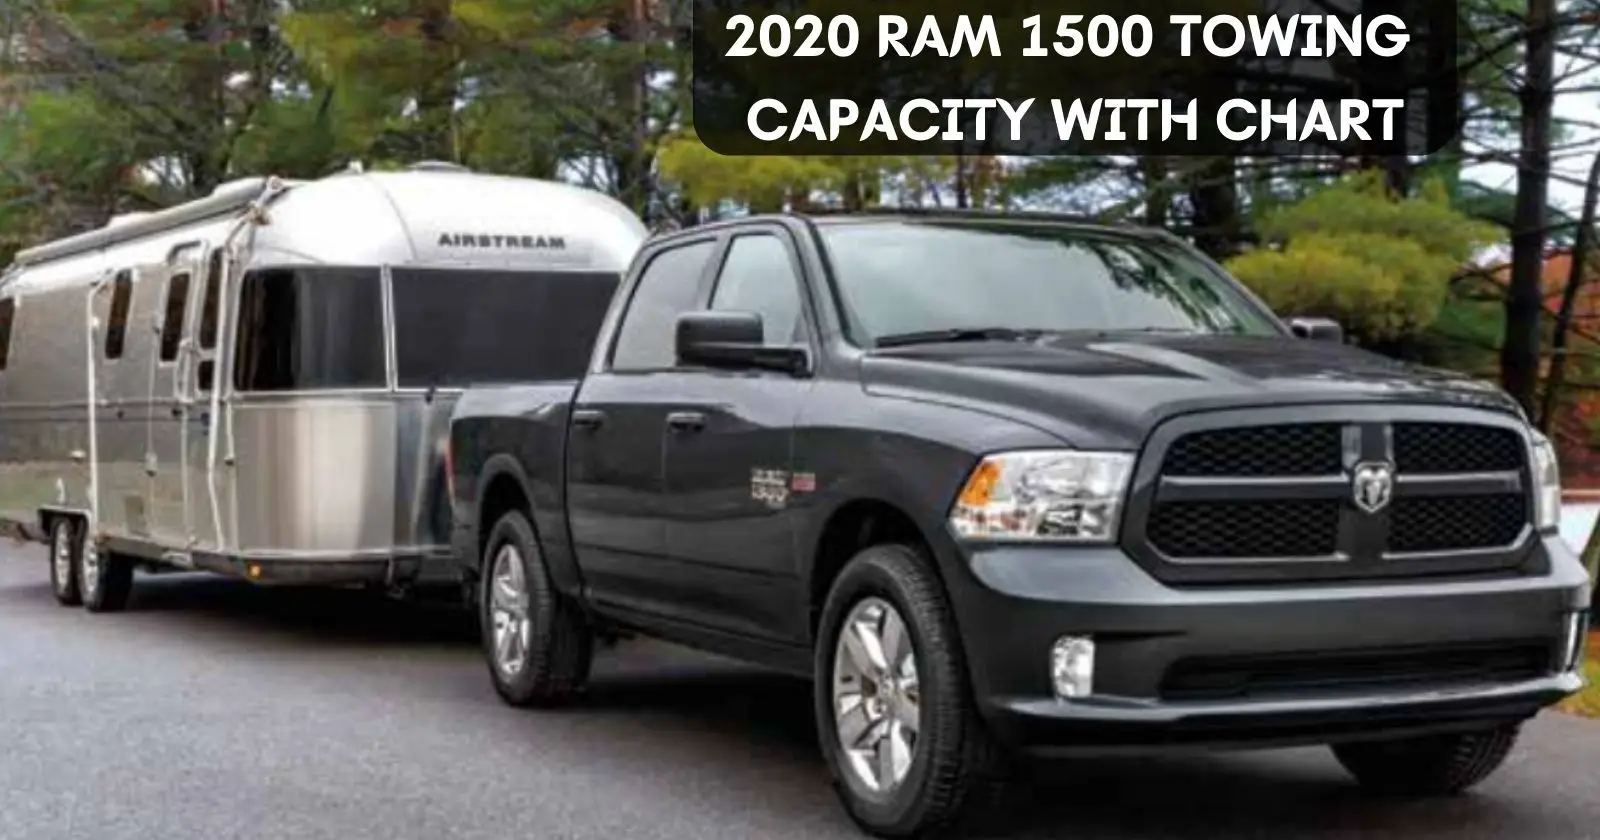 2020-ram-1500-towing-capacity-with-chart-thecartowing